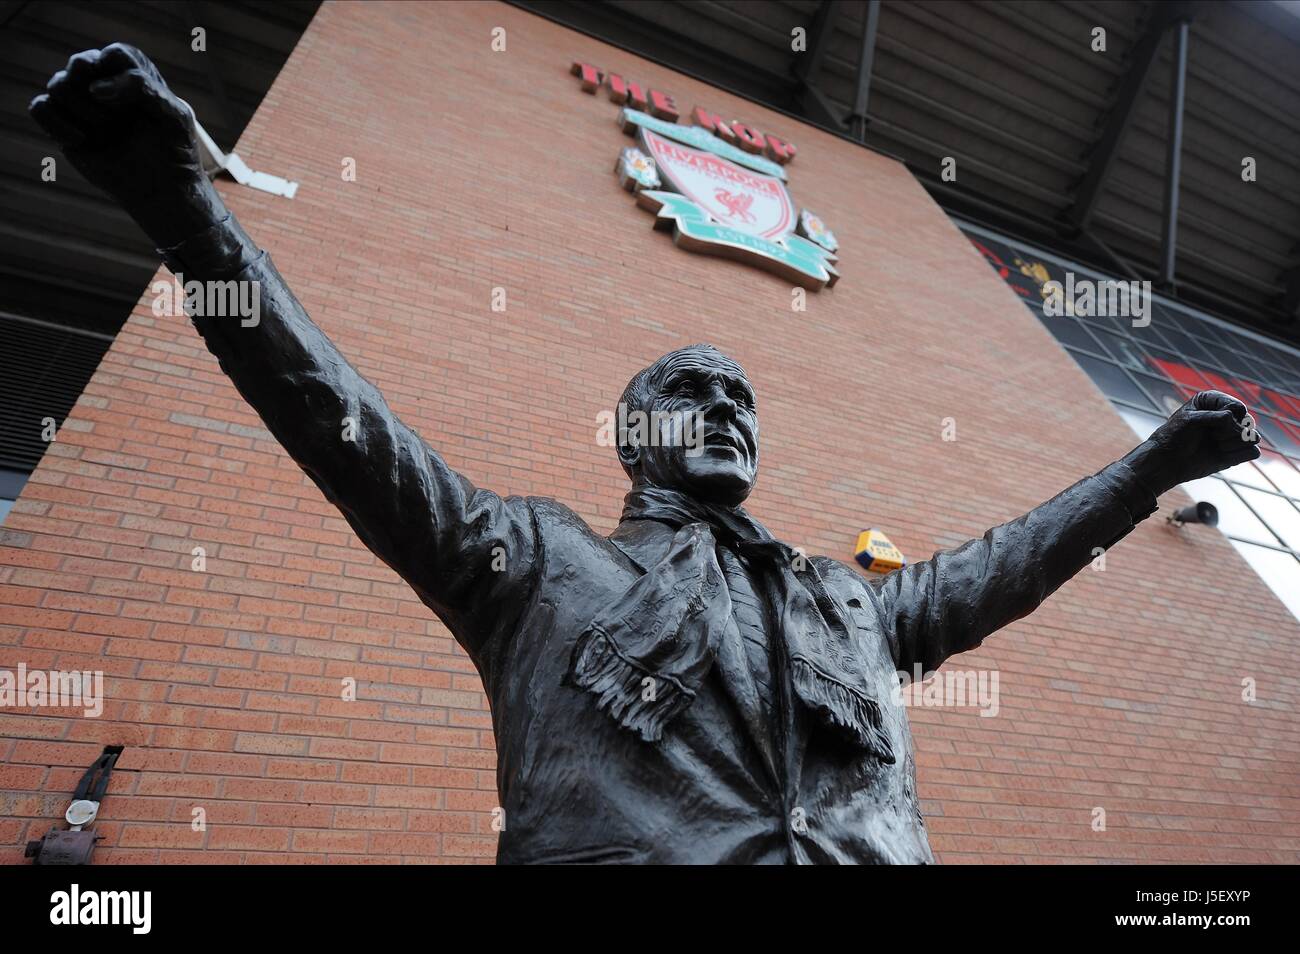 BILL SHANKLY MEMORIAL STATUE LIVERPOOL V MANCHESTER UNITED ANFIELD LIVERPOOL ENGLAND 01 September 2013 Stock Photo